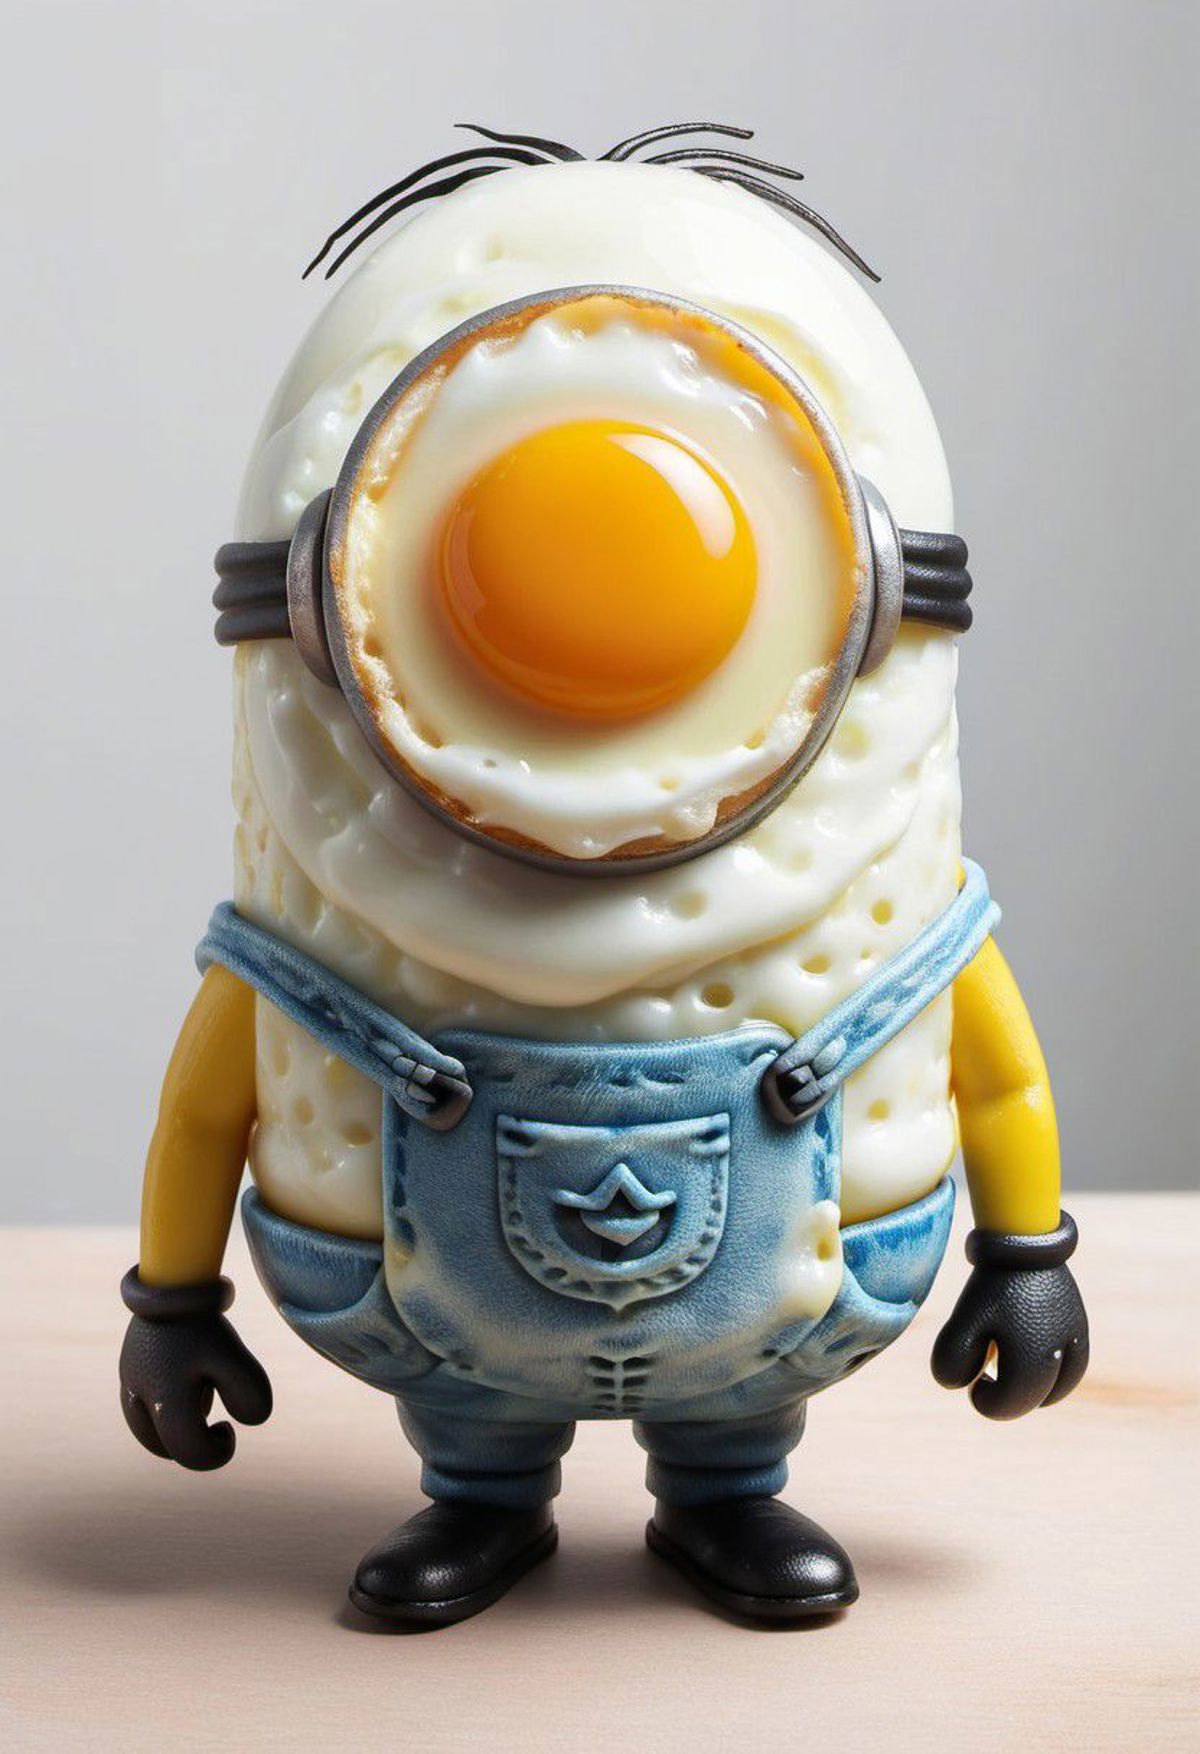 A yellow and blue "Minion" figurine with an egg on top of its head.